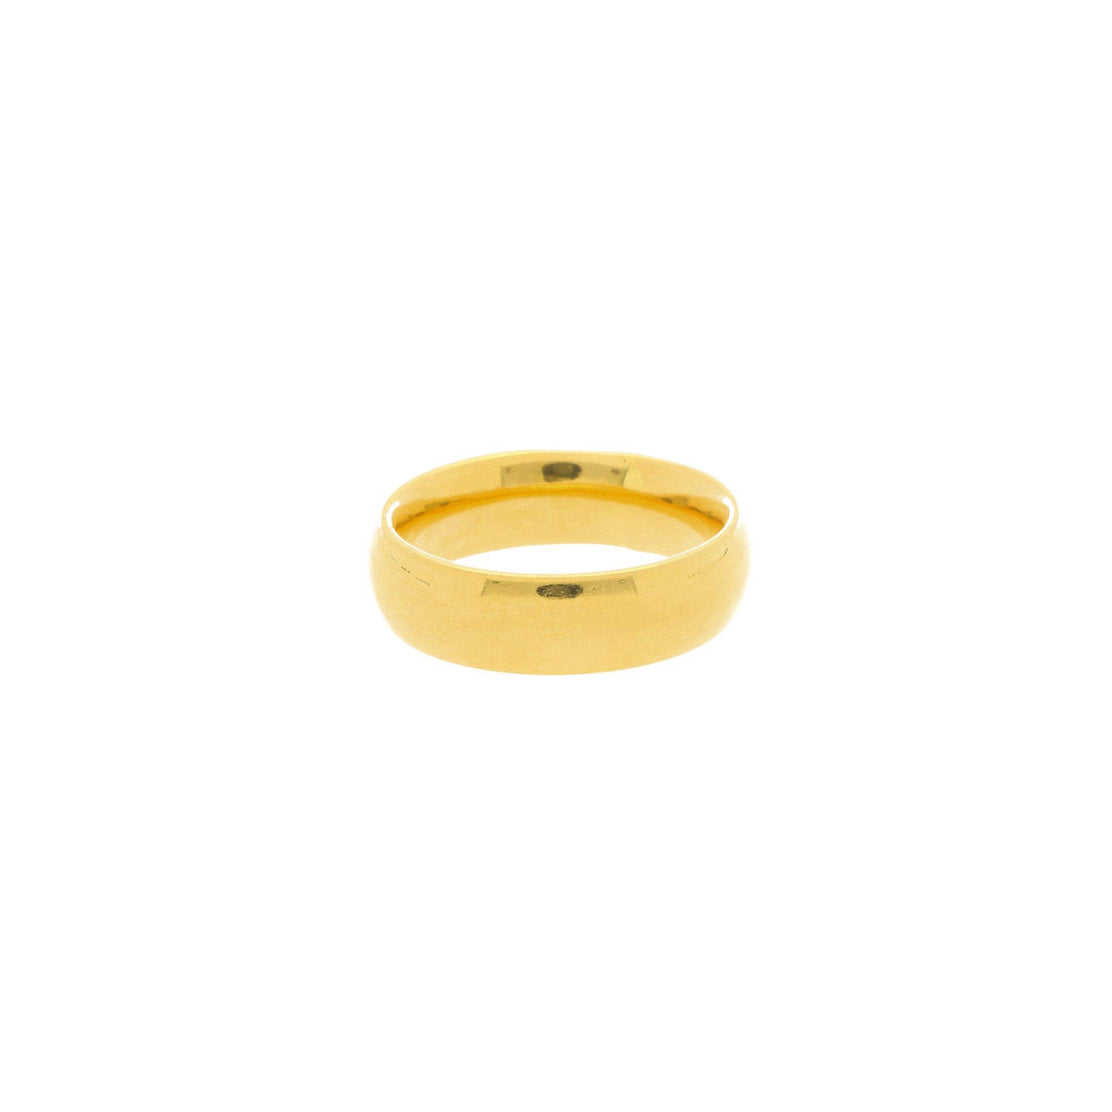 Our New Gold 22K(916) Ring... - OKKY Jewellery Sdn Bhd | Facebook